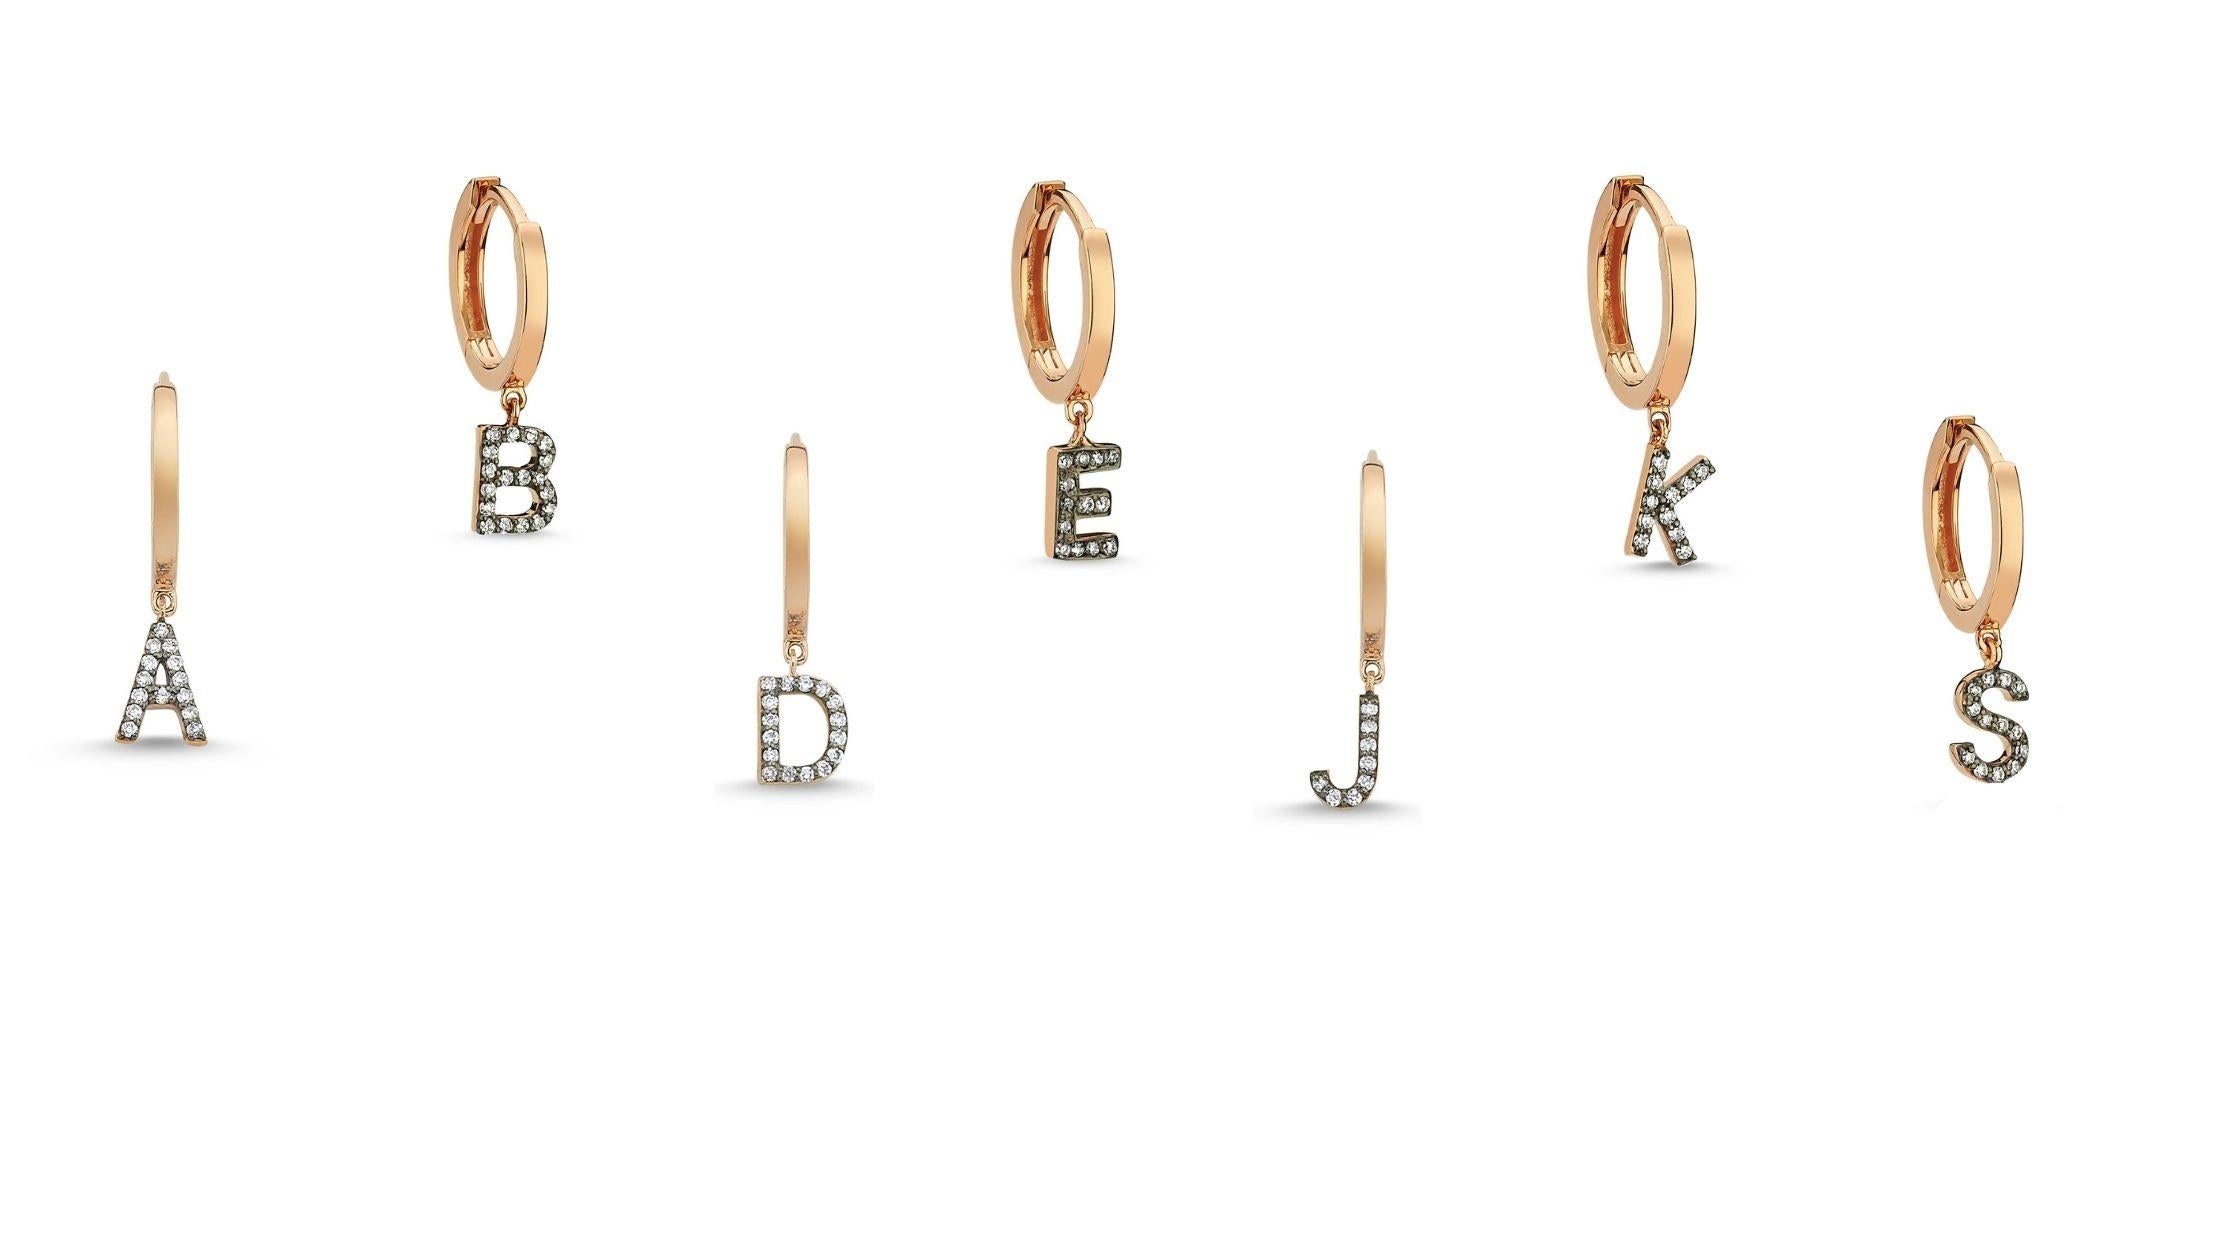 Letter B (single) 14k rose gold earring with white diamond by Selda Jewellery

Additional Information:-
Collection: Letter Collection
14k Rose gold
0.04ct White diamond
Letter height 1cm